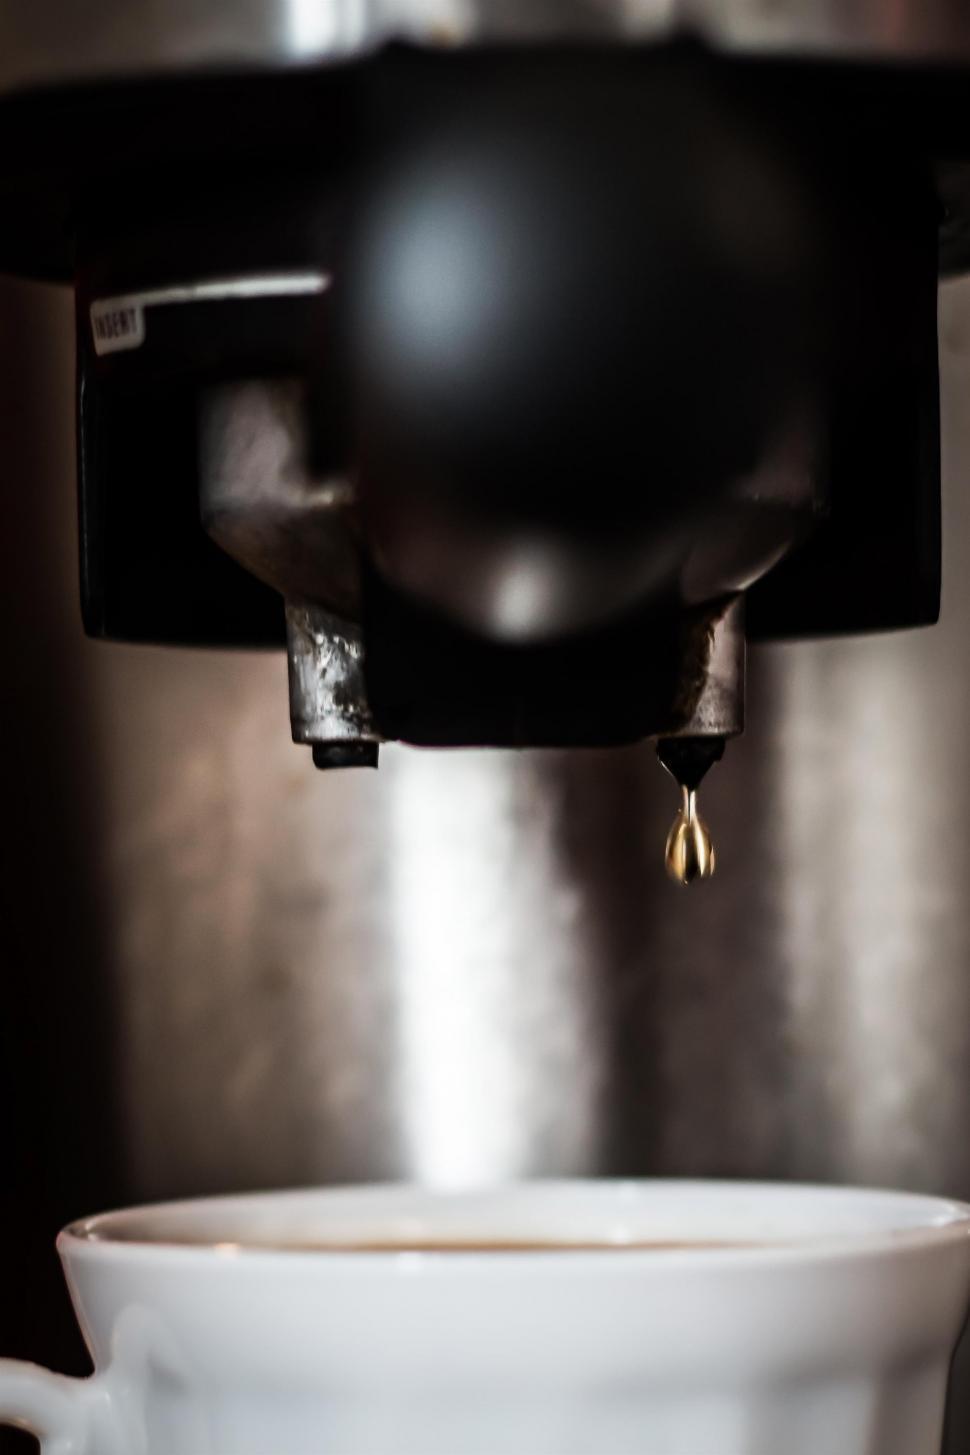 Free Image of Coffee Cup Being Filled With Water 